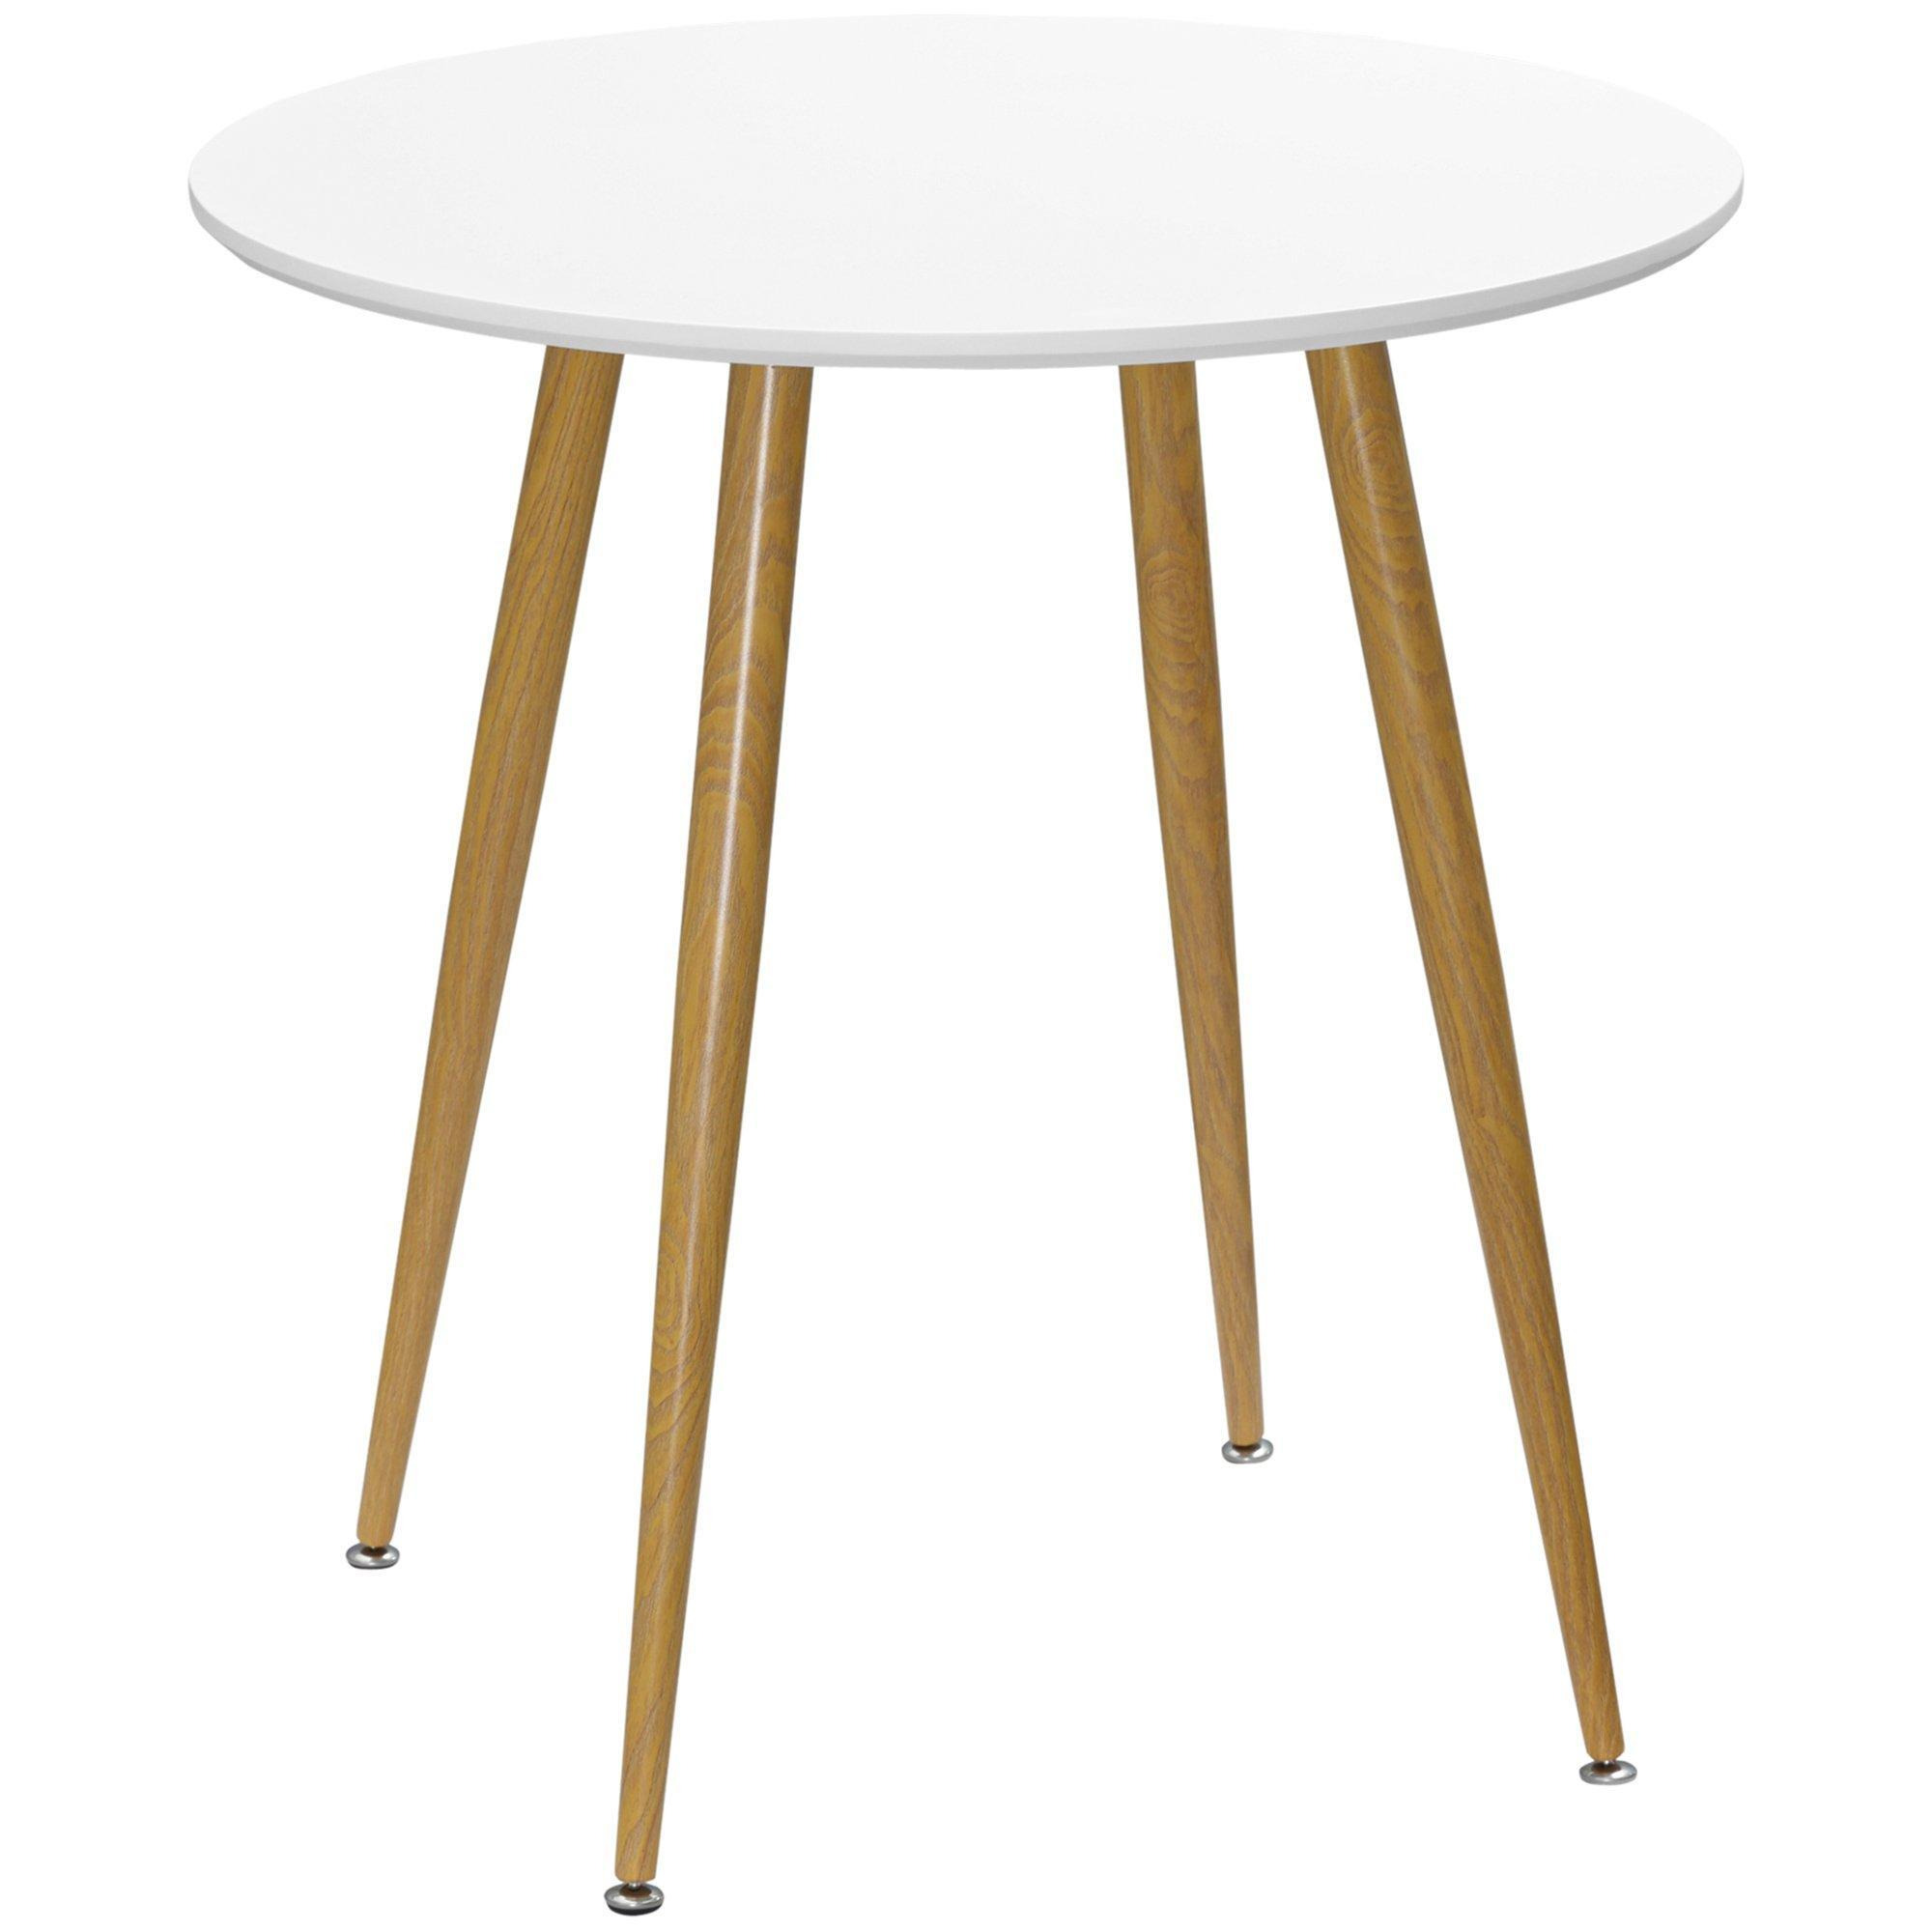 Modern Dining Table with Matte Round Top Metal Base for 2 People - image 1